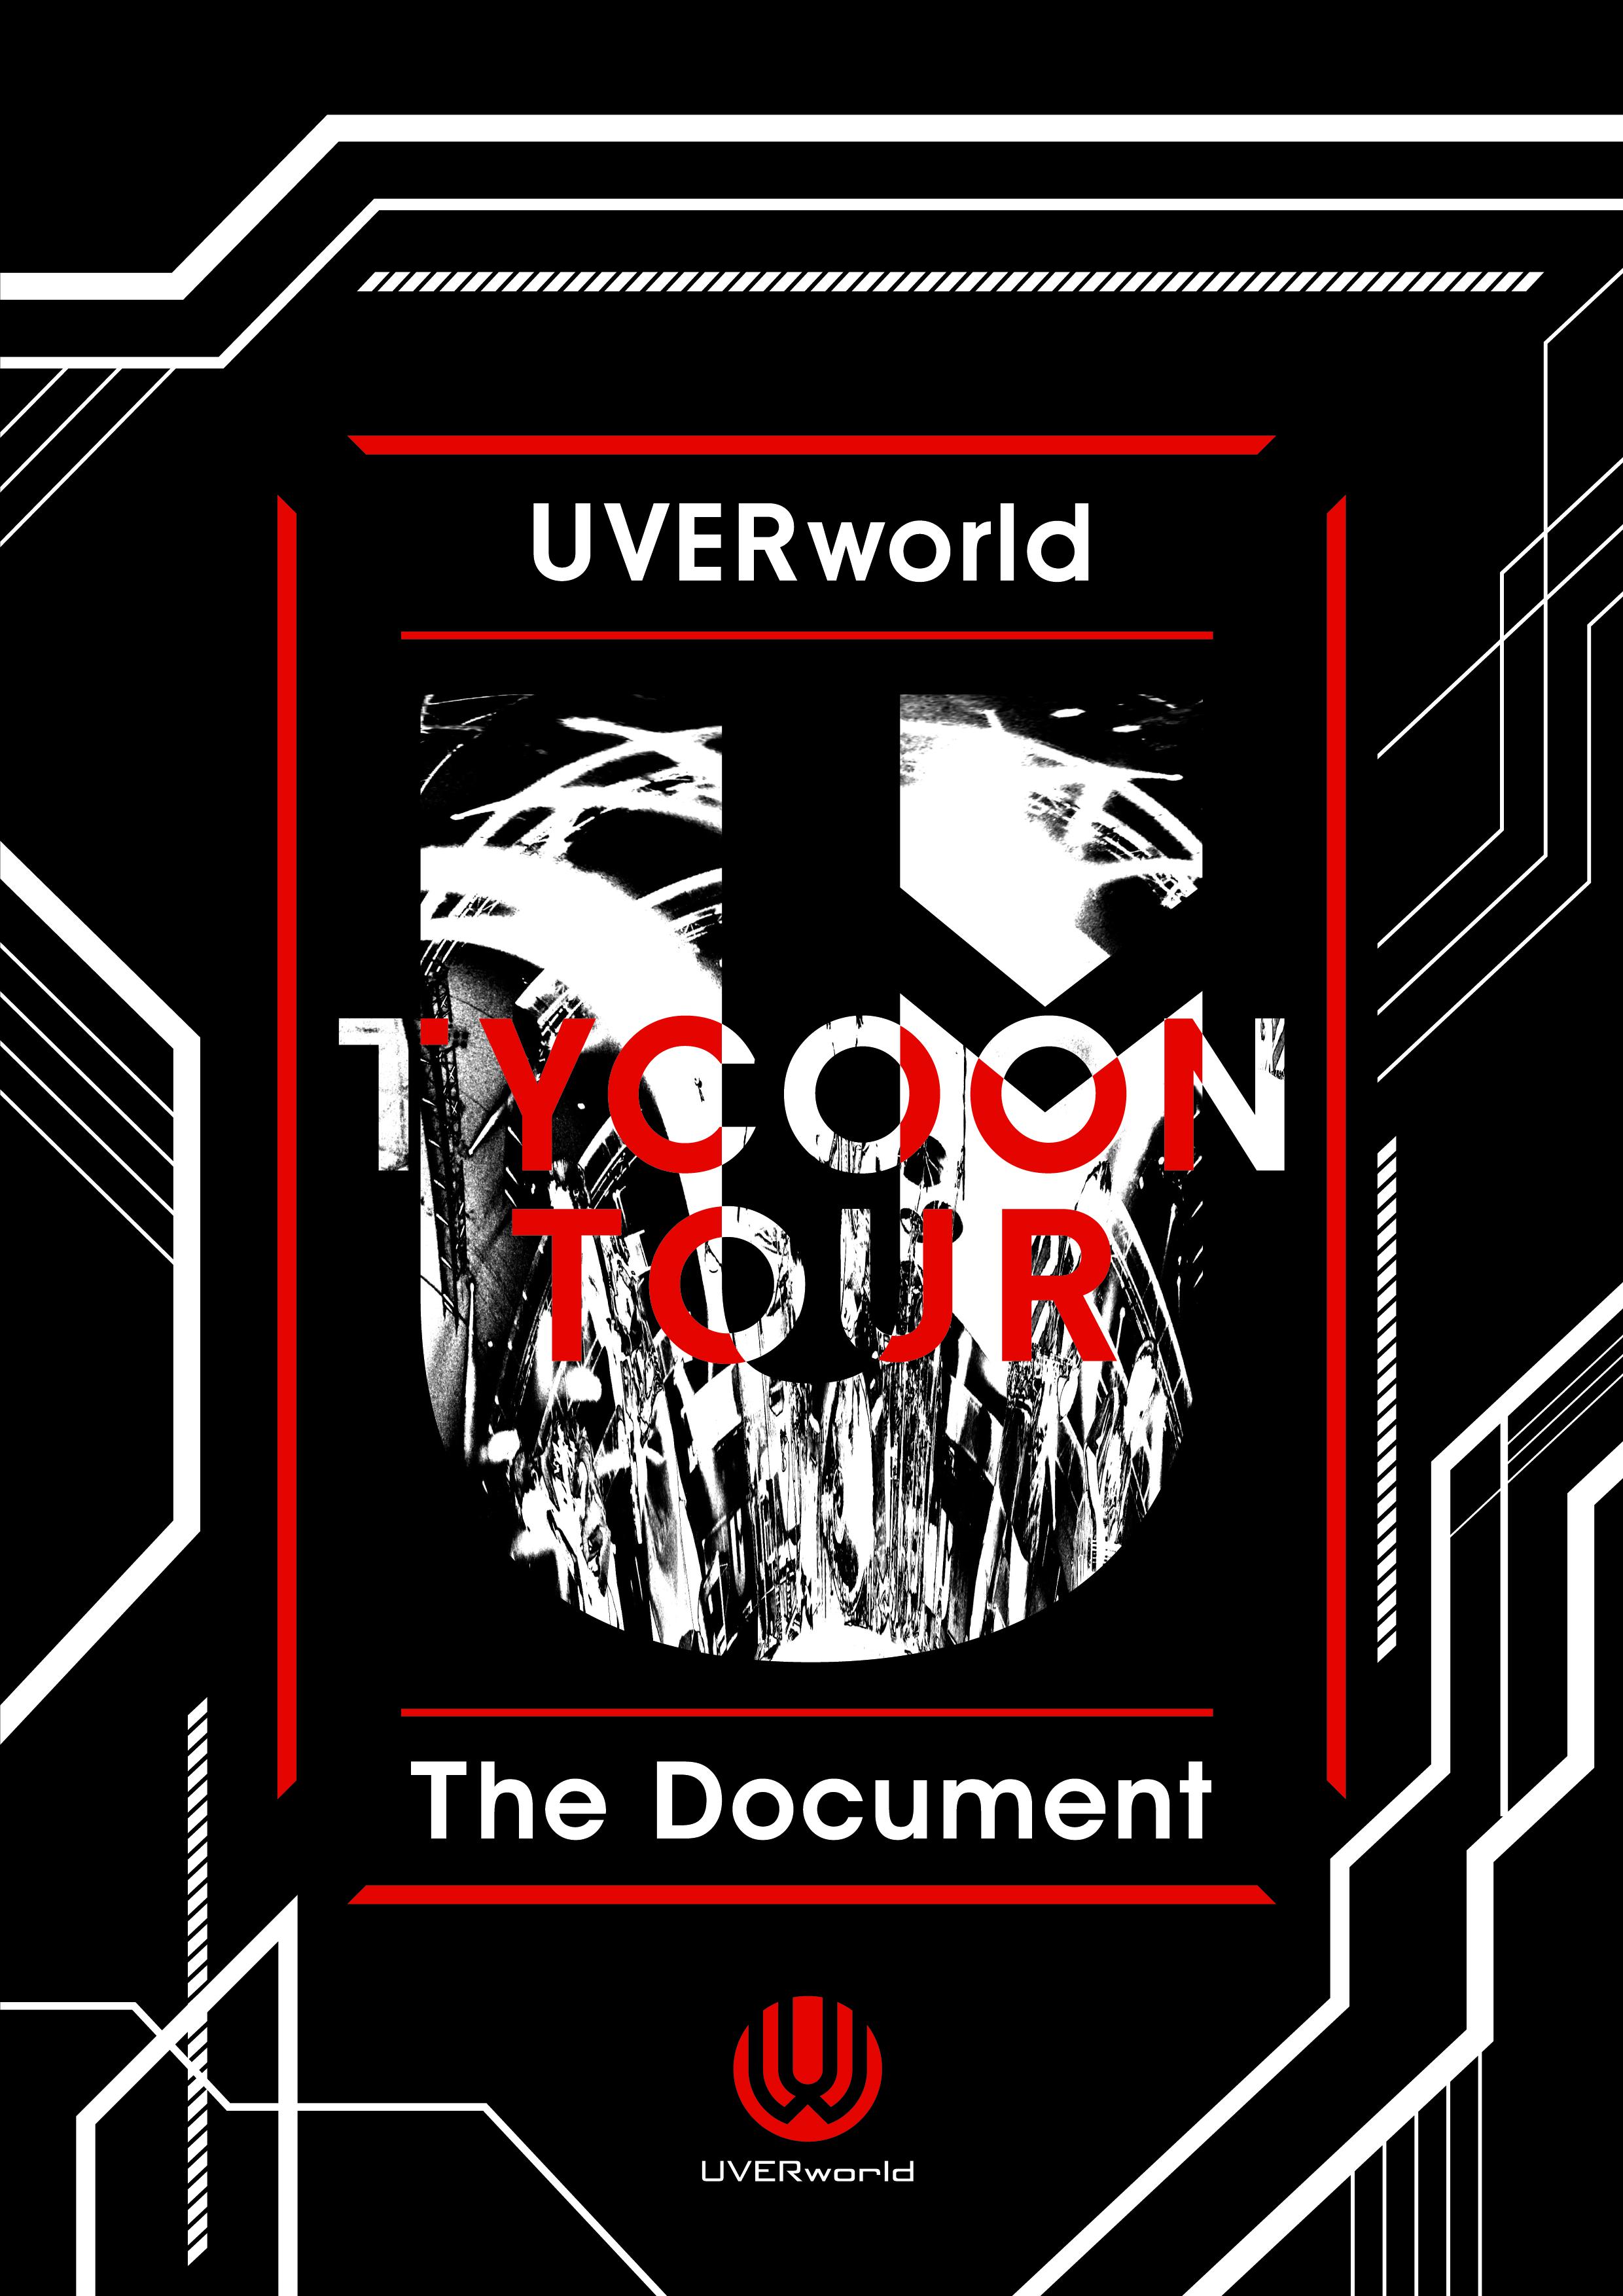 UVERworld TYCOON TOUR The Document - ドキュメントブック編集部